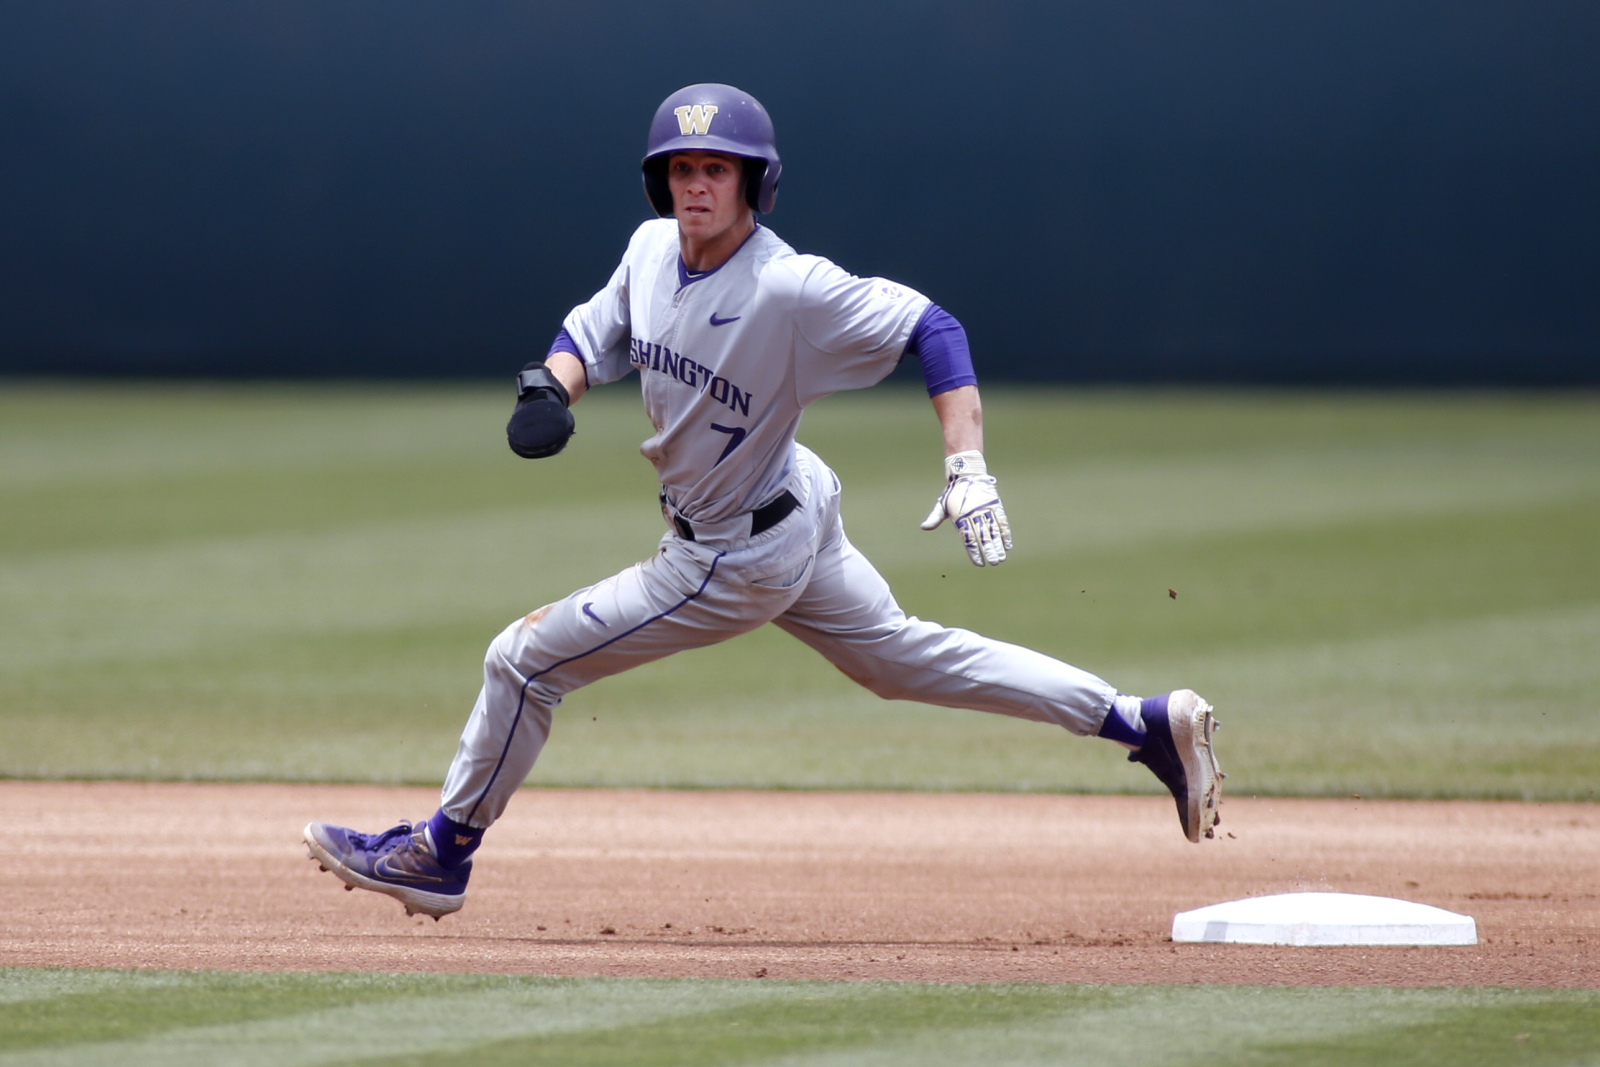 Husky baseball: What we know about NCAA-imposed sanctions